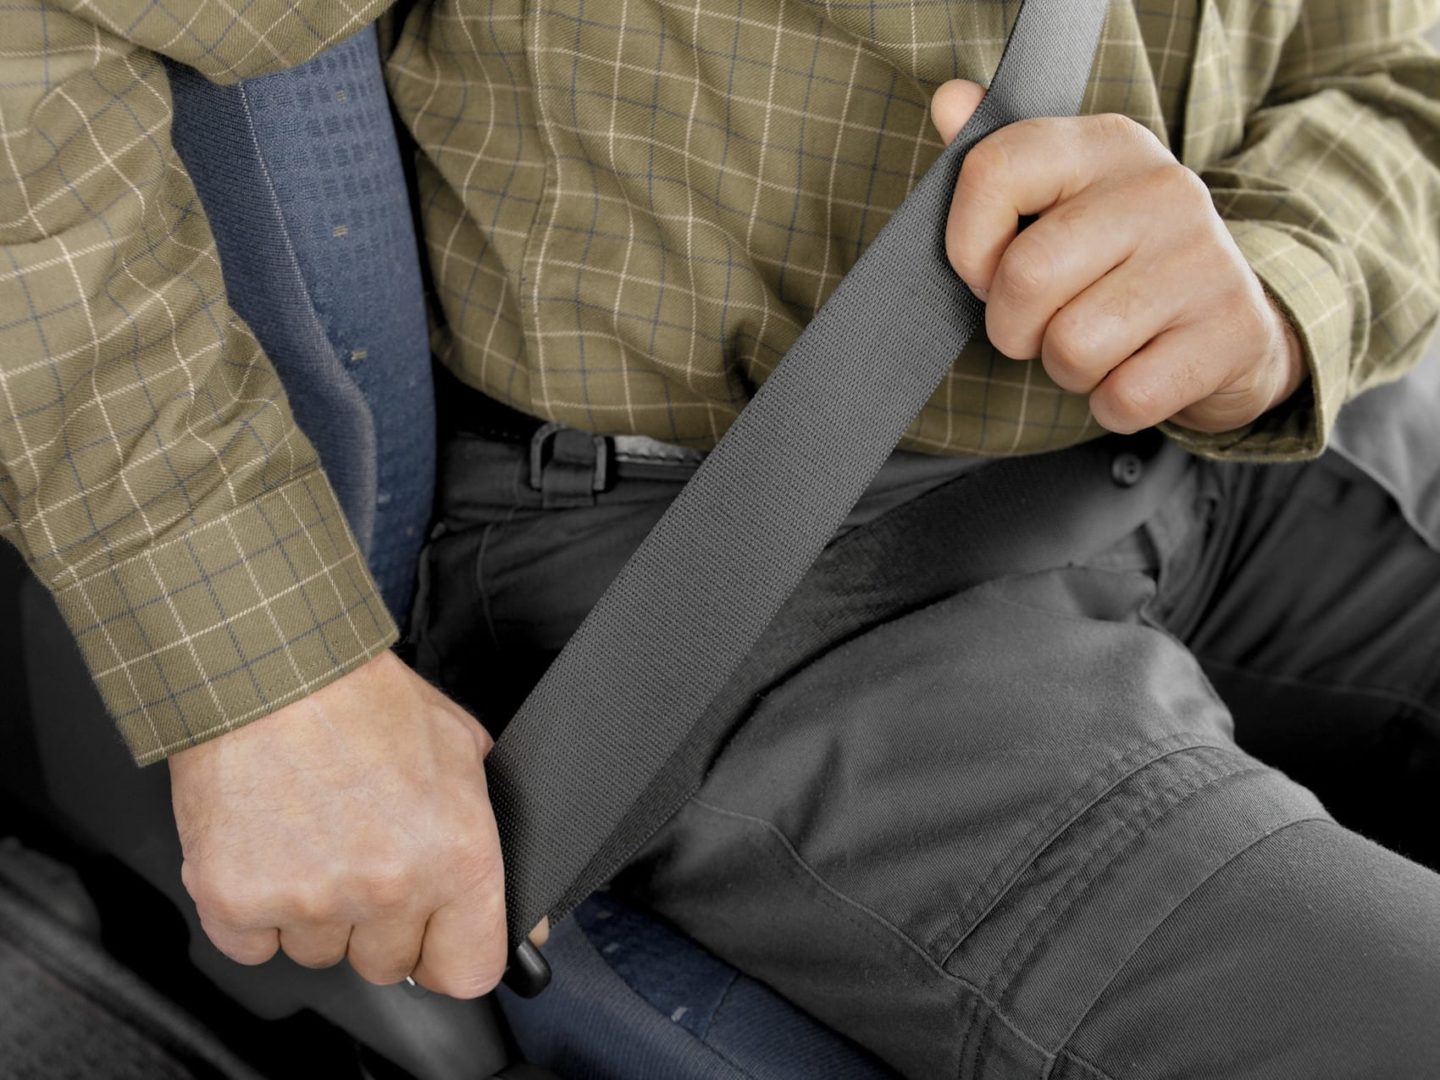 40th Anniversary of the Seat Belt Act